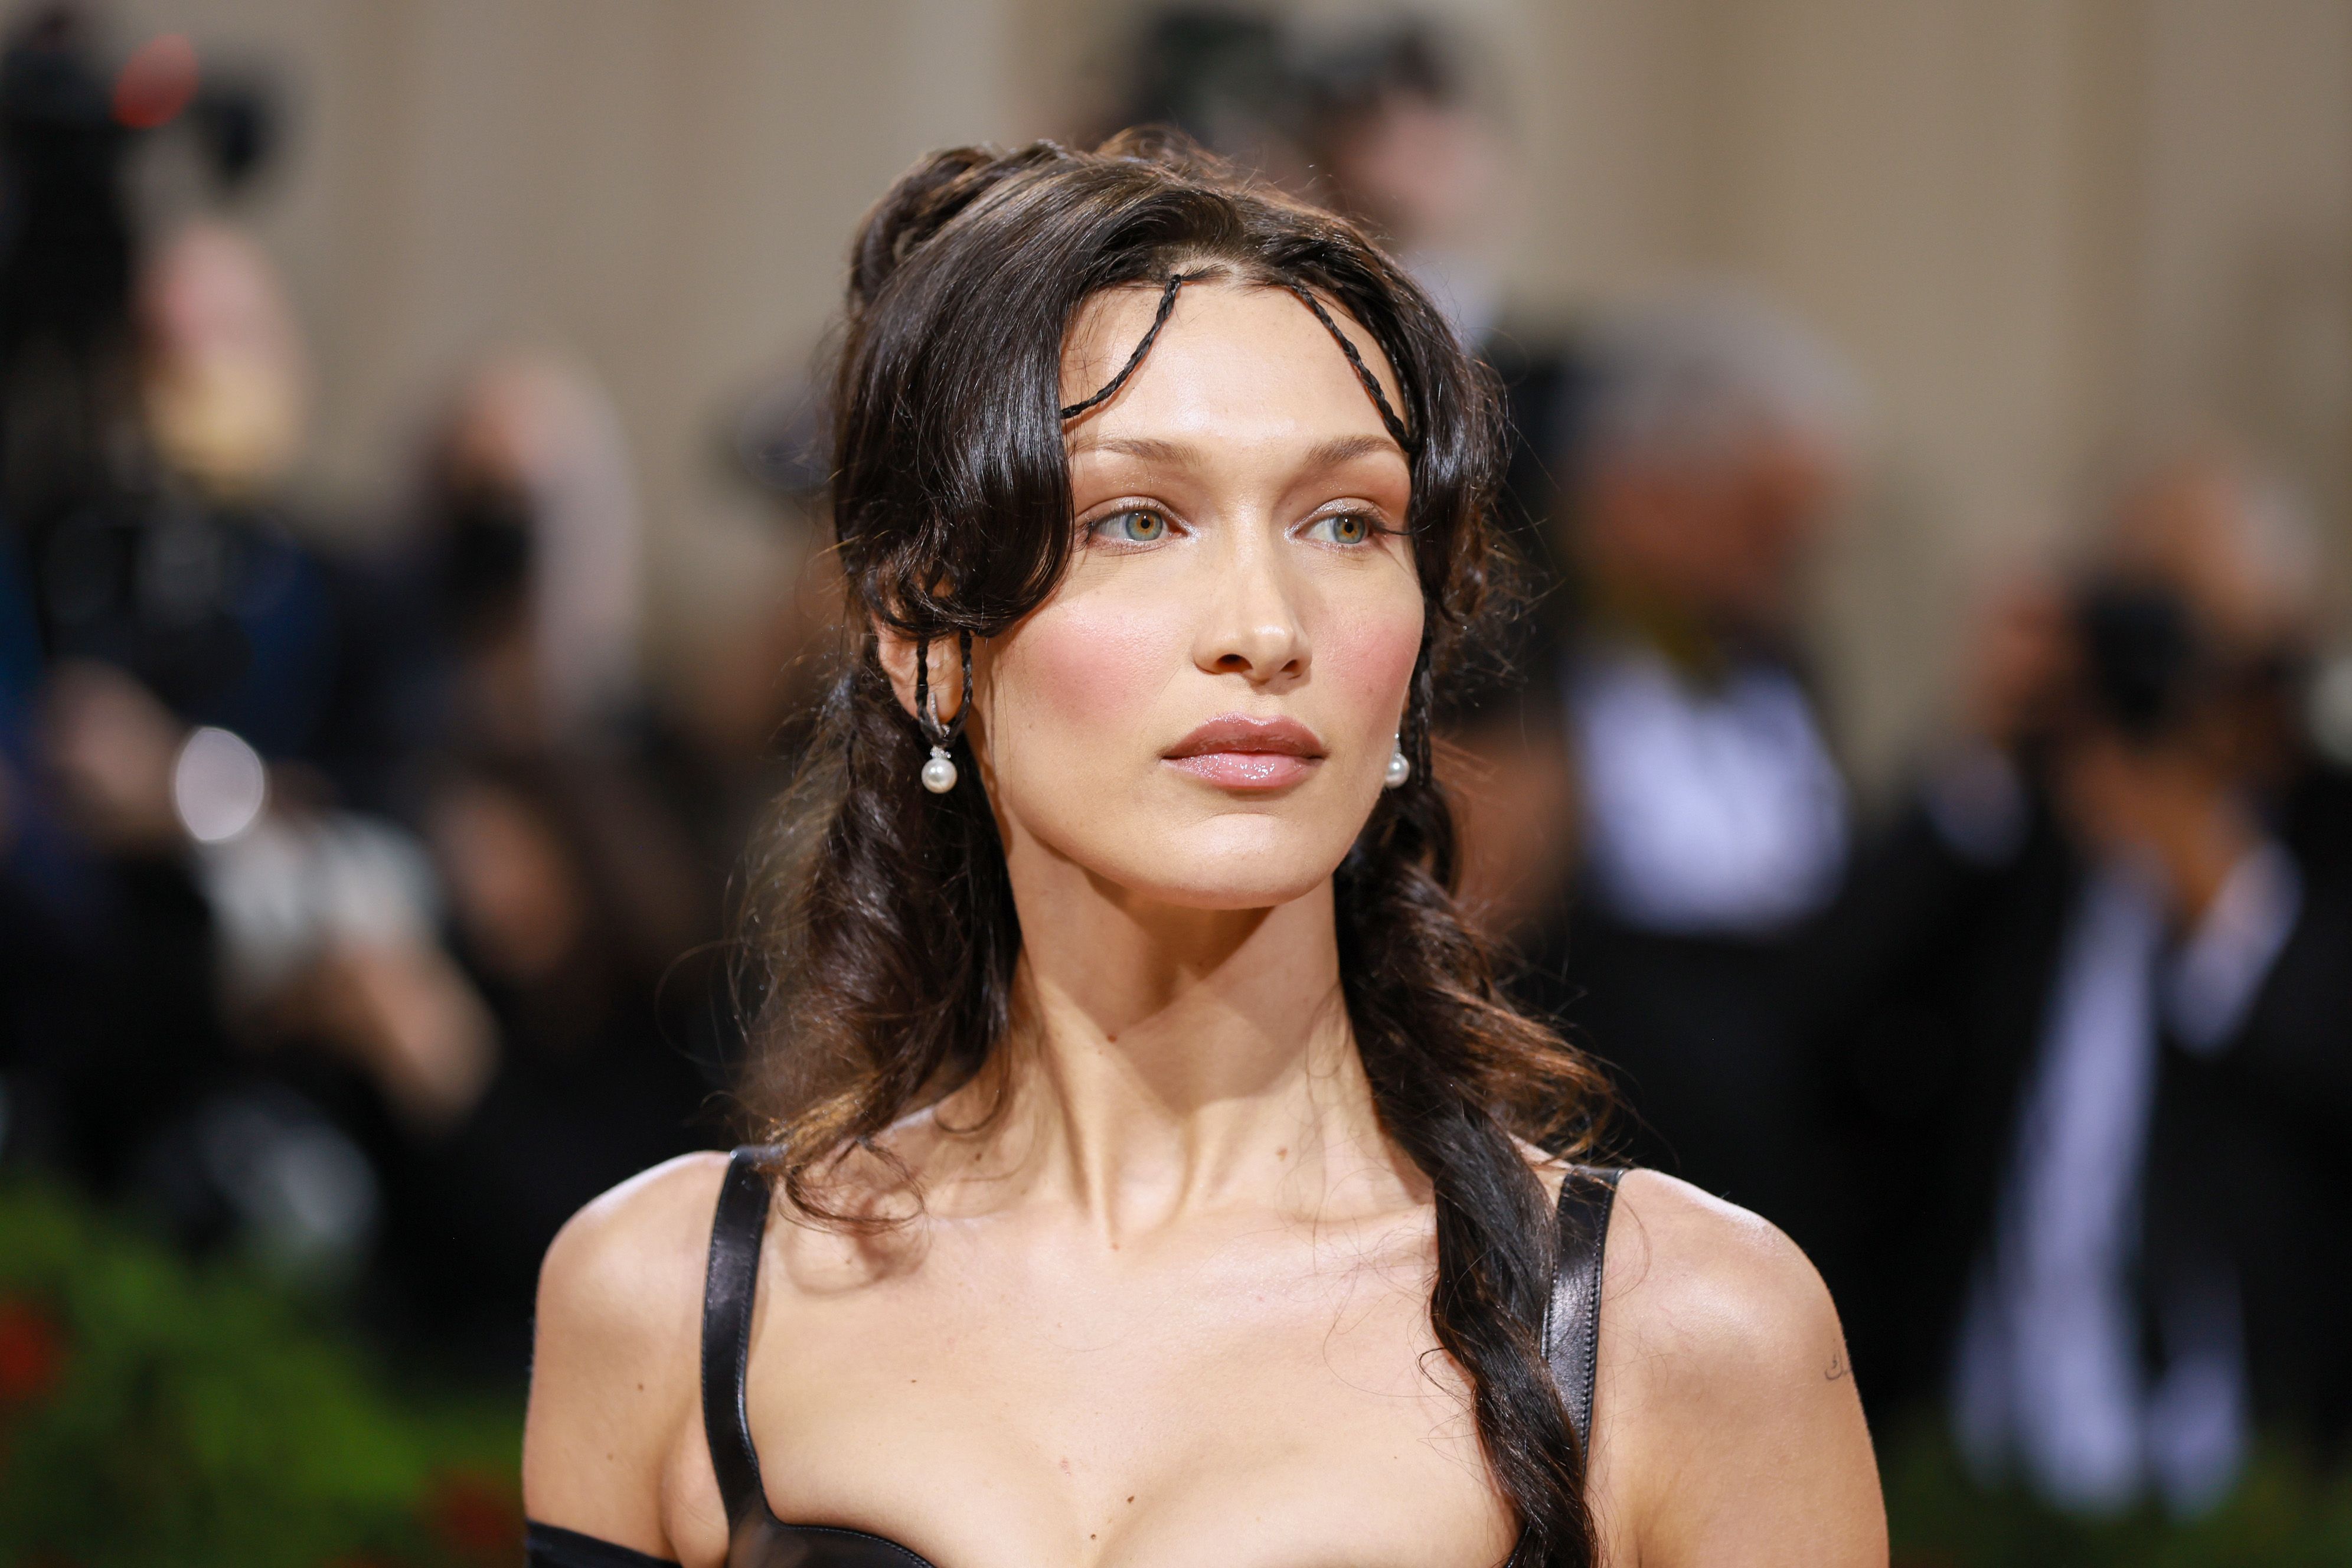 bella-hadid-attends-the-2022-met-gala-celebrating-in-news-photo-1651541047